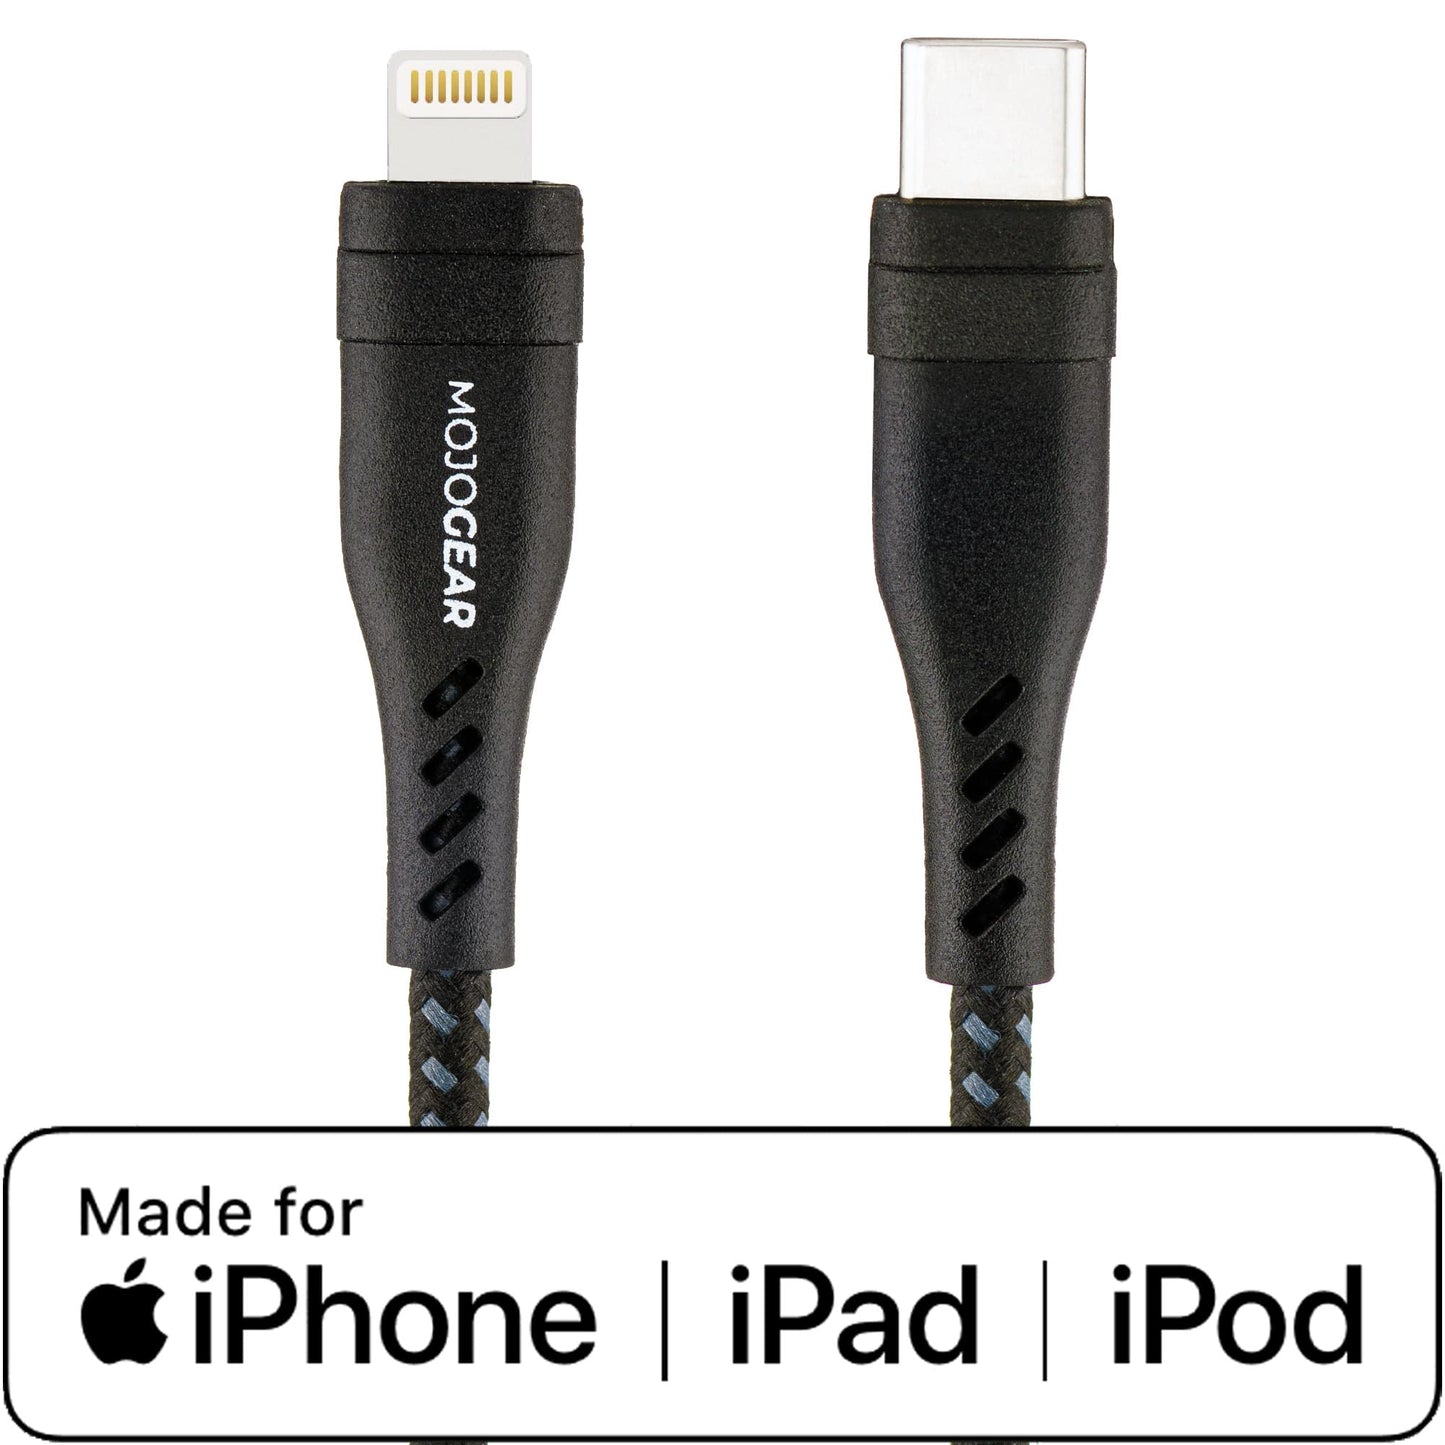 2x MOJOGEAR Apple Lightning to USB-C cable extra strong [DUO PACK]